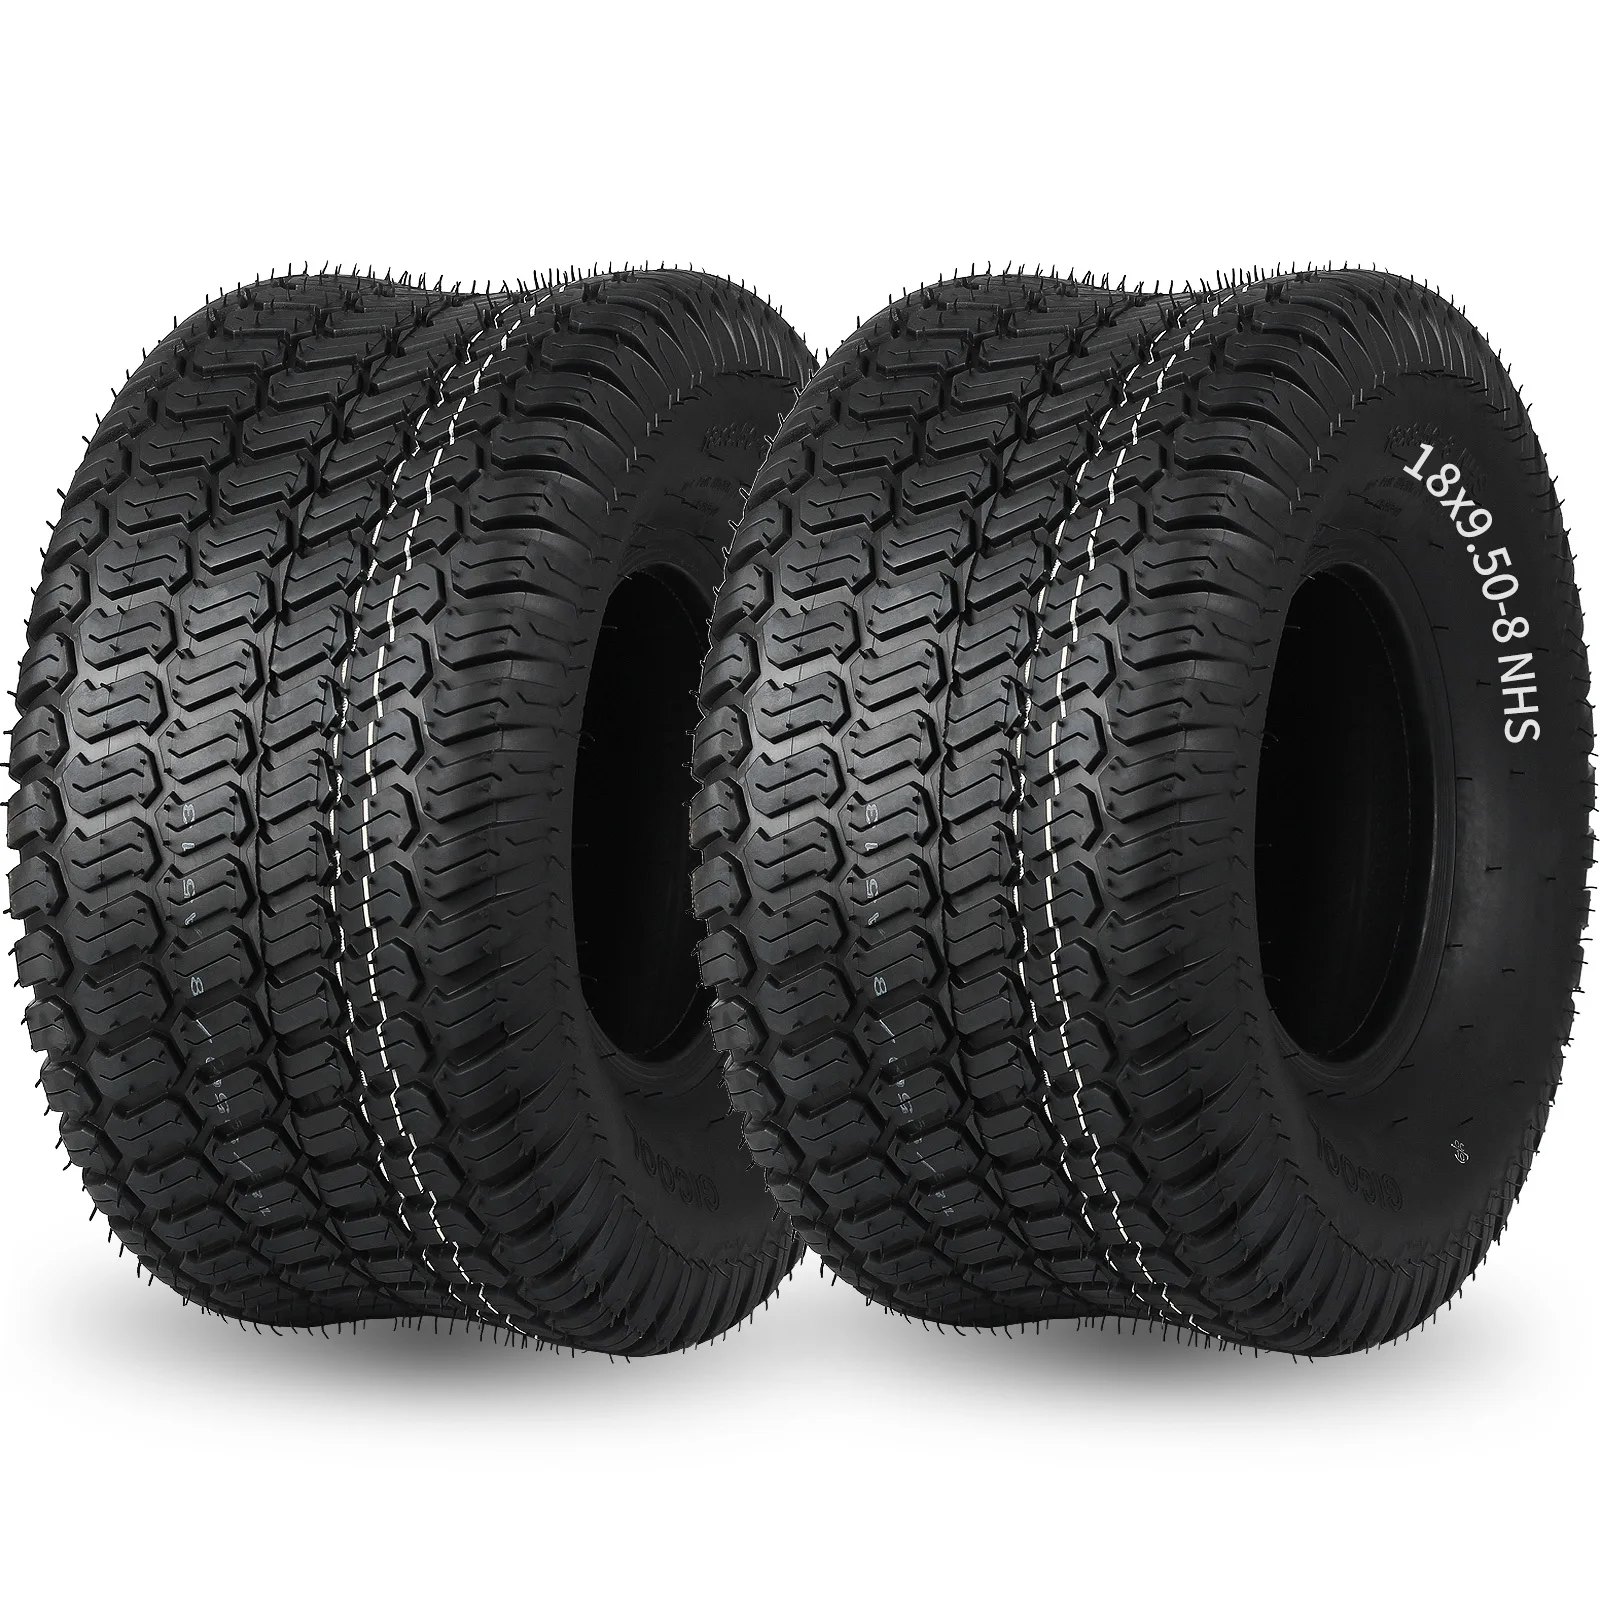 18 x 9.50-8 Turf-S Pattern Lawn Mower Tire, 18x9.5-8 Lawn Tractor Tire, 18x9.5-8 for Riding Lawnmowers, 4 Ply